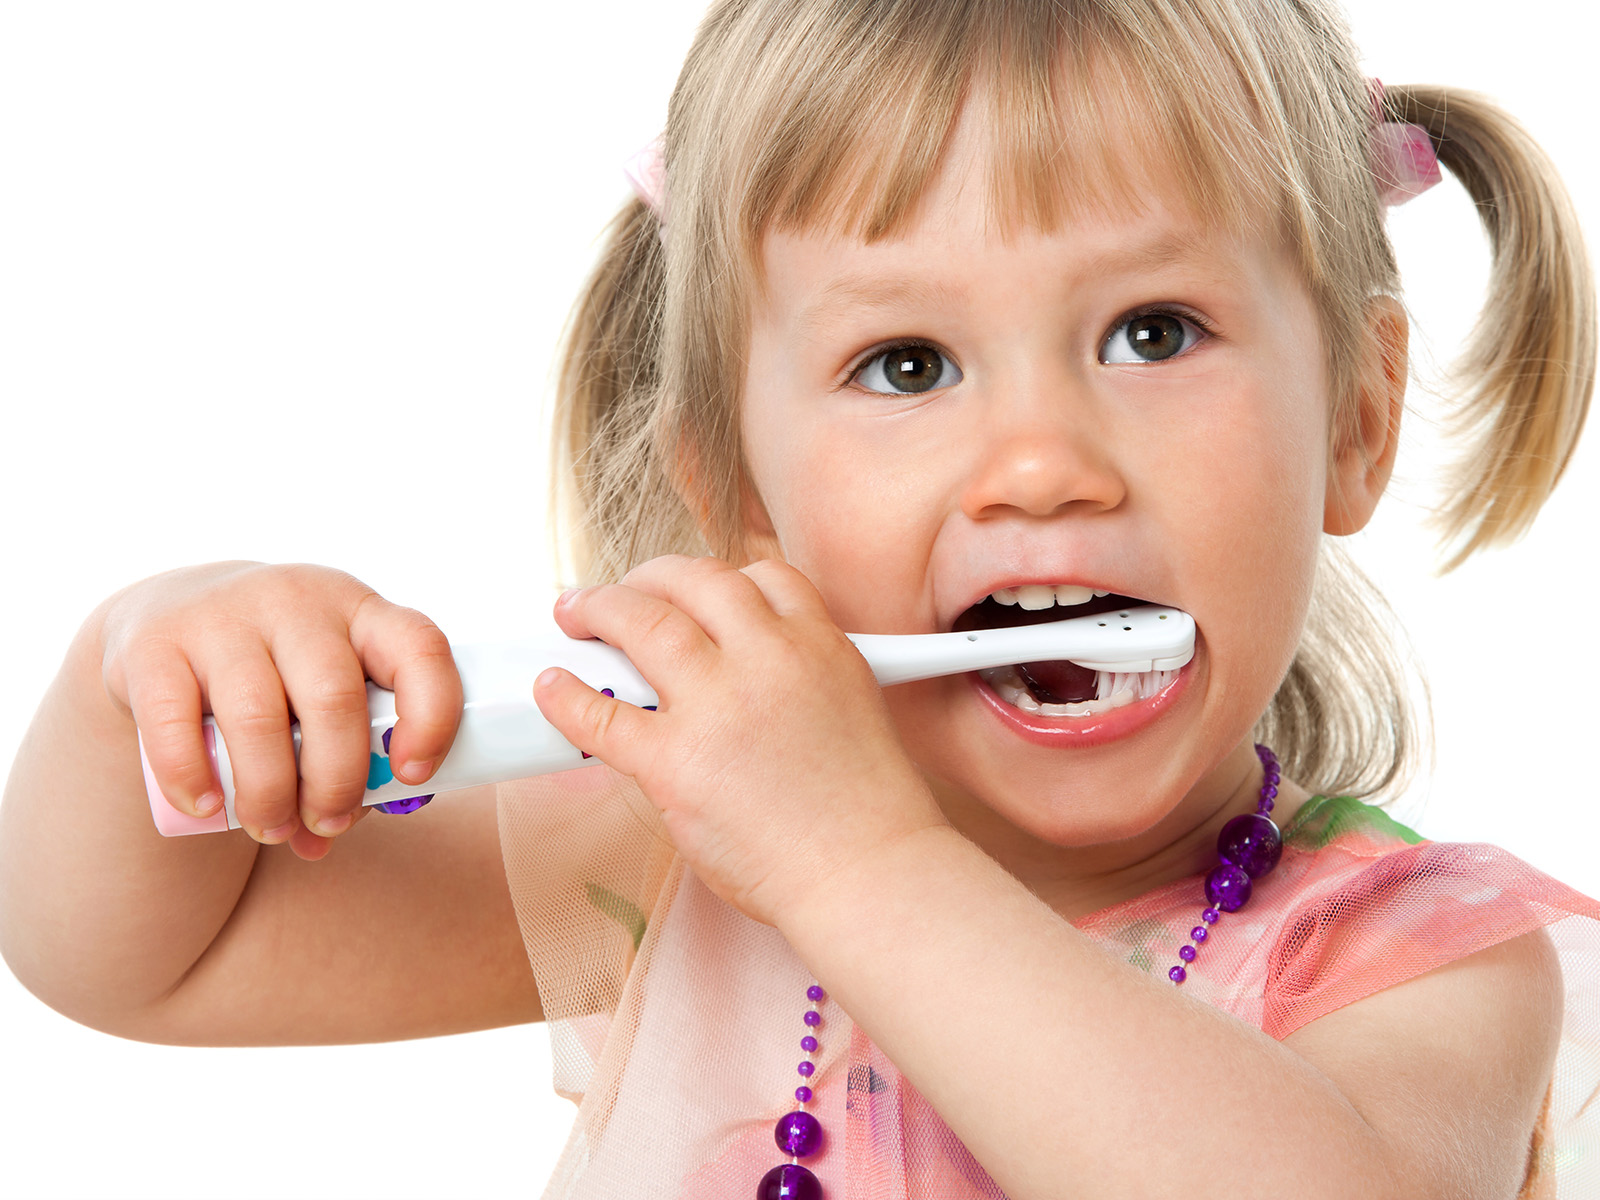 Can Kids Use Electric Toothbrushes?